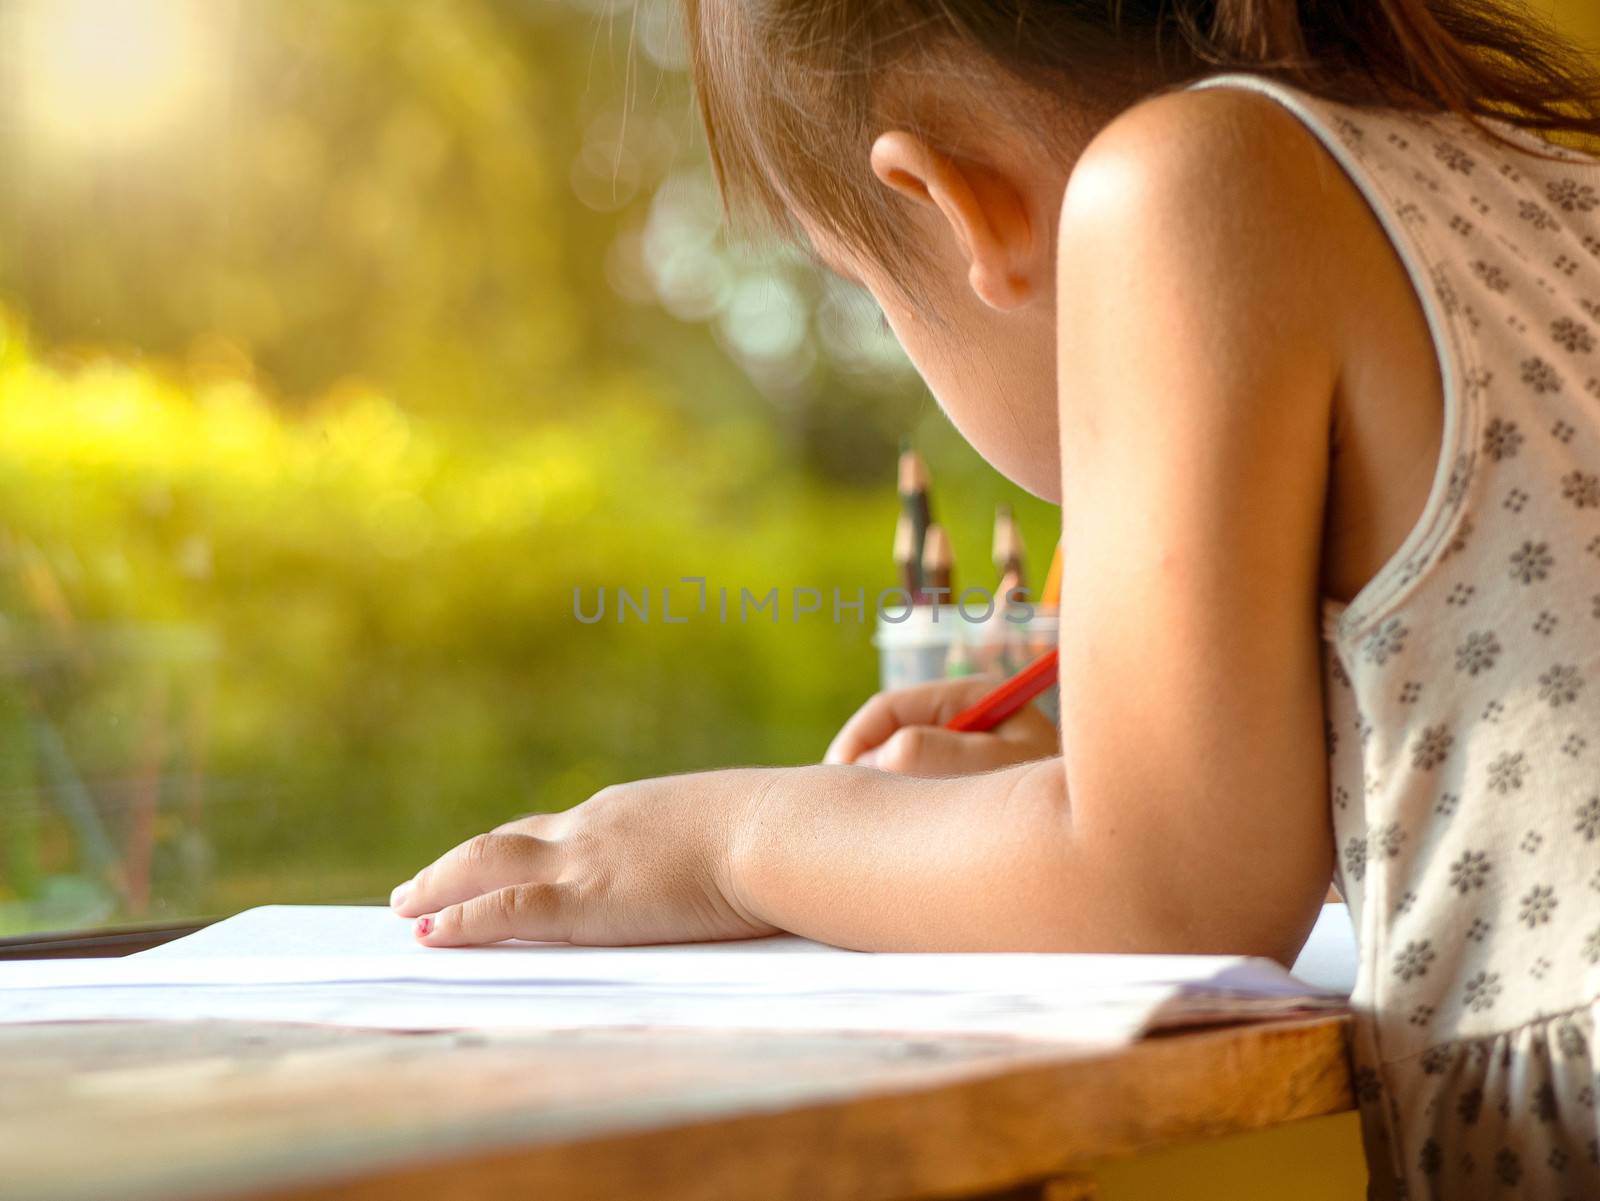 Cute Asian little girl using colored pencils to paint on paper, sitting at a table by the window in the house. Preschoolers study at home during the corona virus epidemic. by TEERASAK